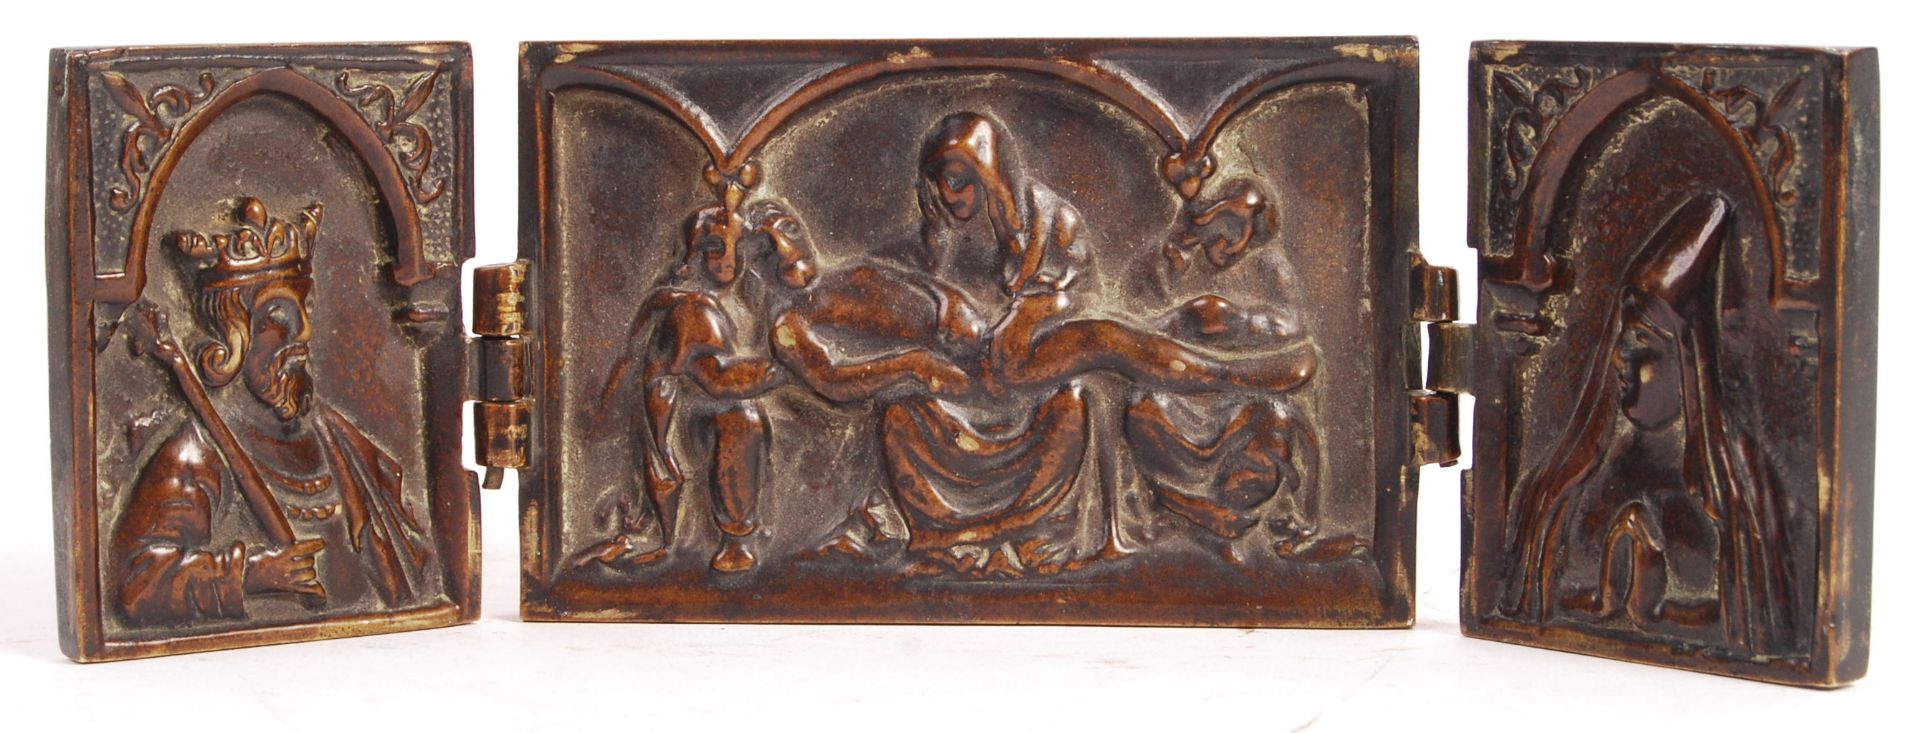 17TH CENTURY BRONZE TRIPTYCH OF THE DEPOSITION OF CHRIST